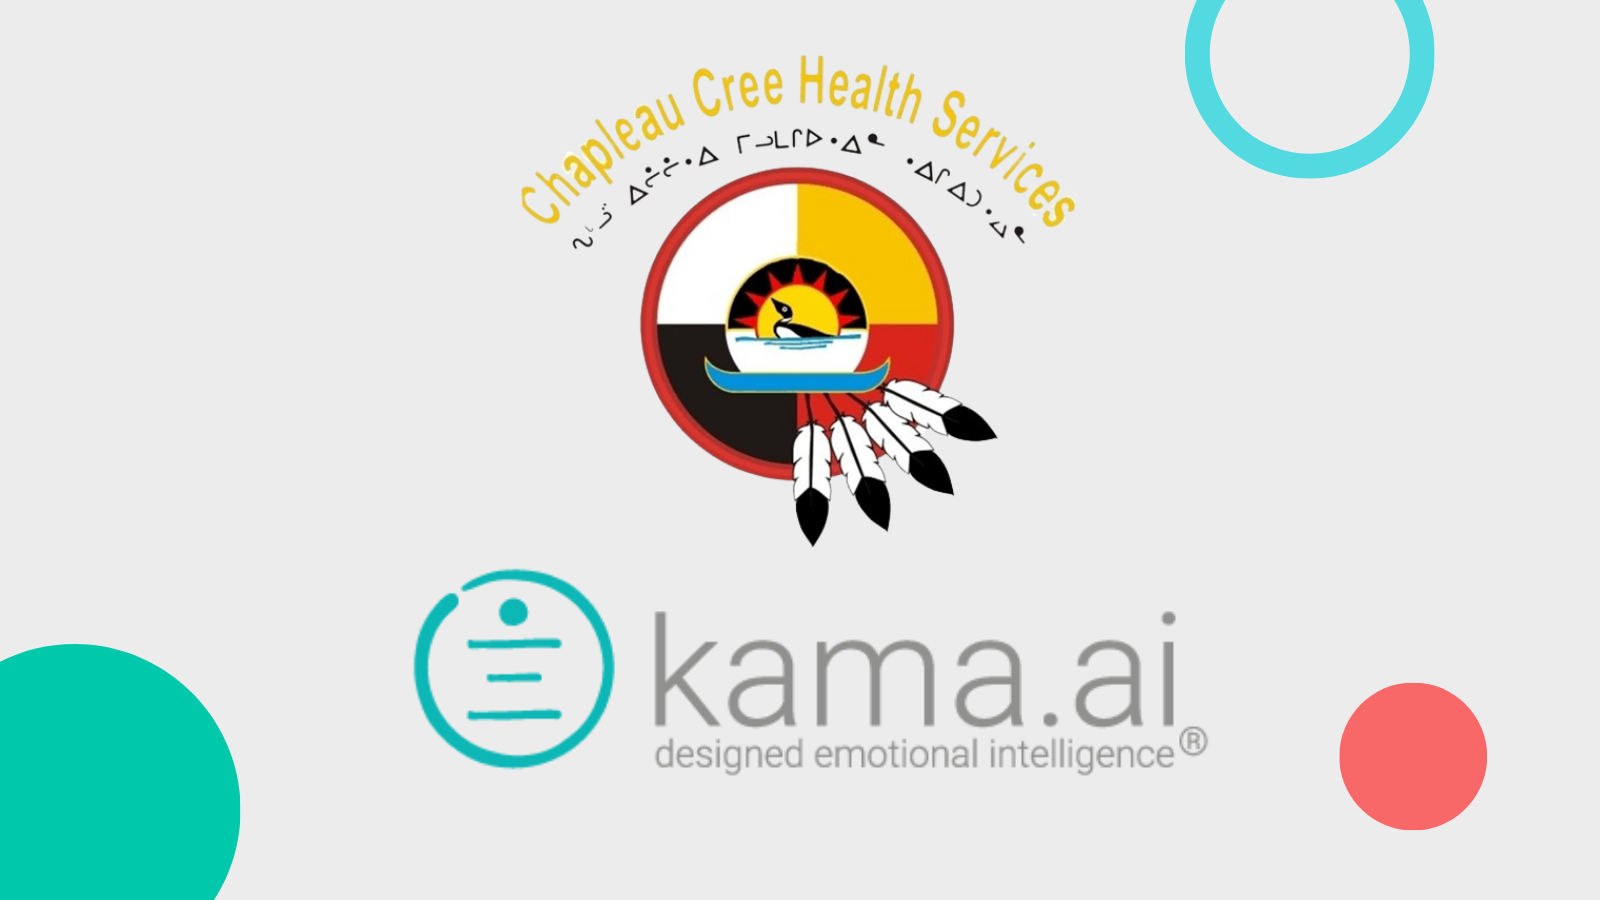 Indigenous business kama.ai conducts study with Chapleau Cree Health Society. Illustrated by Medicine Wheel.